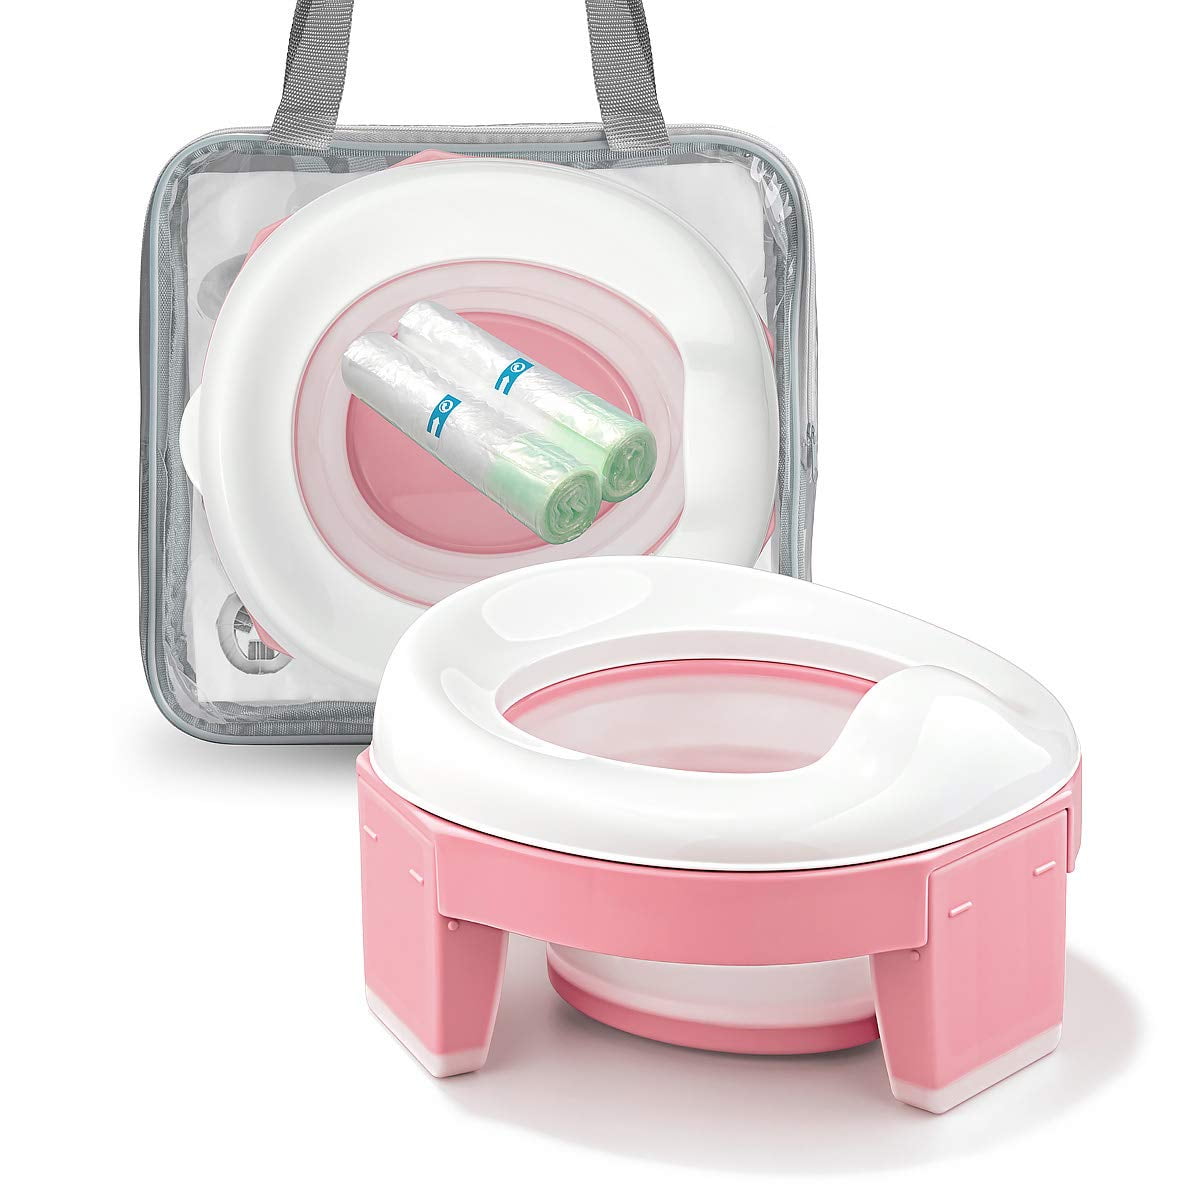 Kids Potty Toilet Rose red Small Portable Travel Carry Seat Potty Baby Training Bedpan with Lid for Boys and Girls 